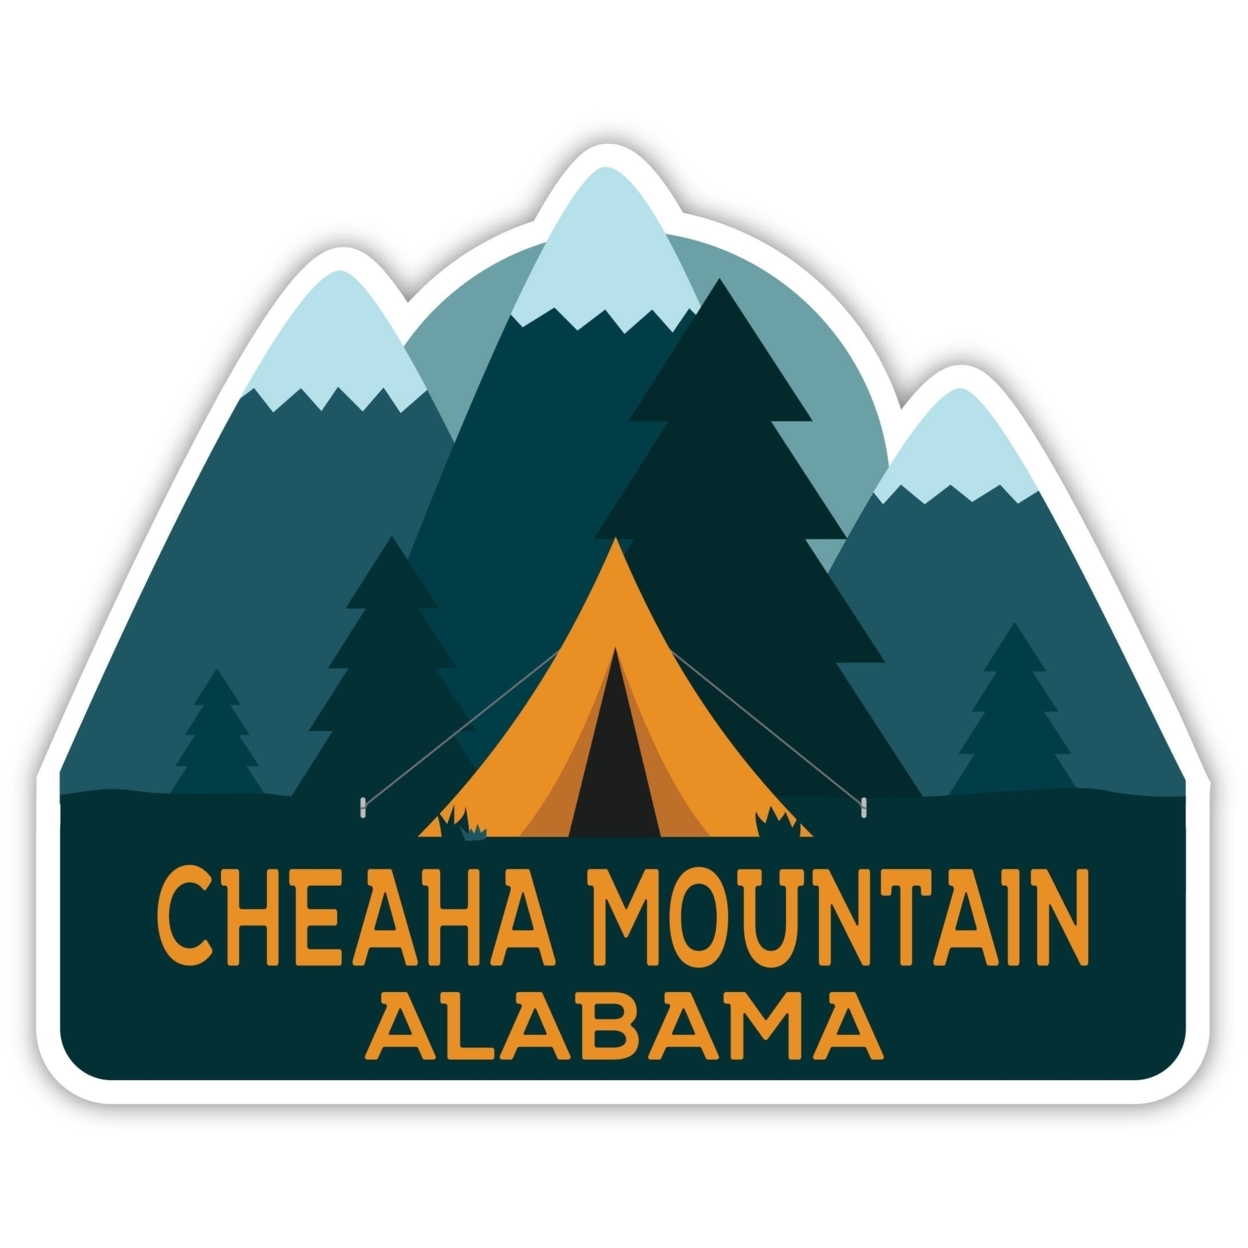 Cheaha Mountain Alabama Souvenir Decorative Stickers (Choose Theme And Size) - 4-Pack, 4-Inch, Great Outdoors